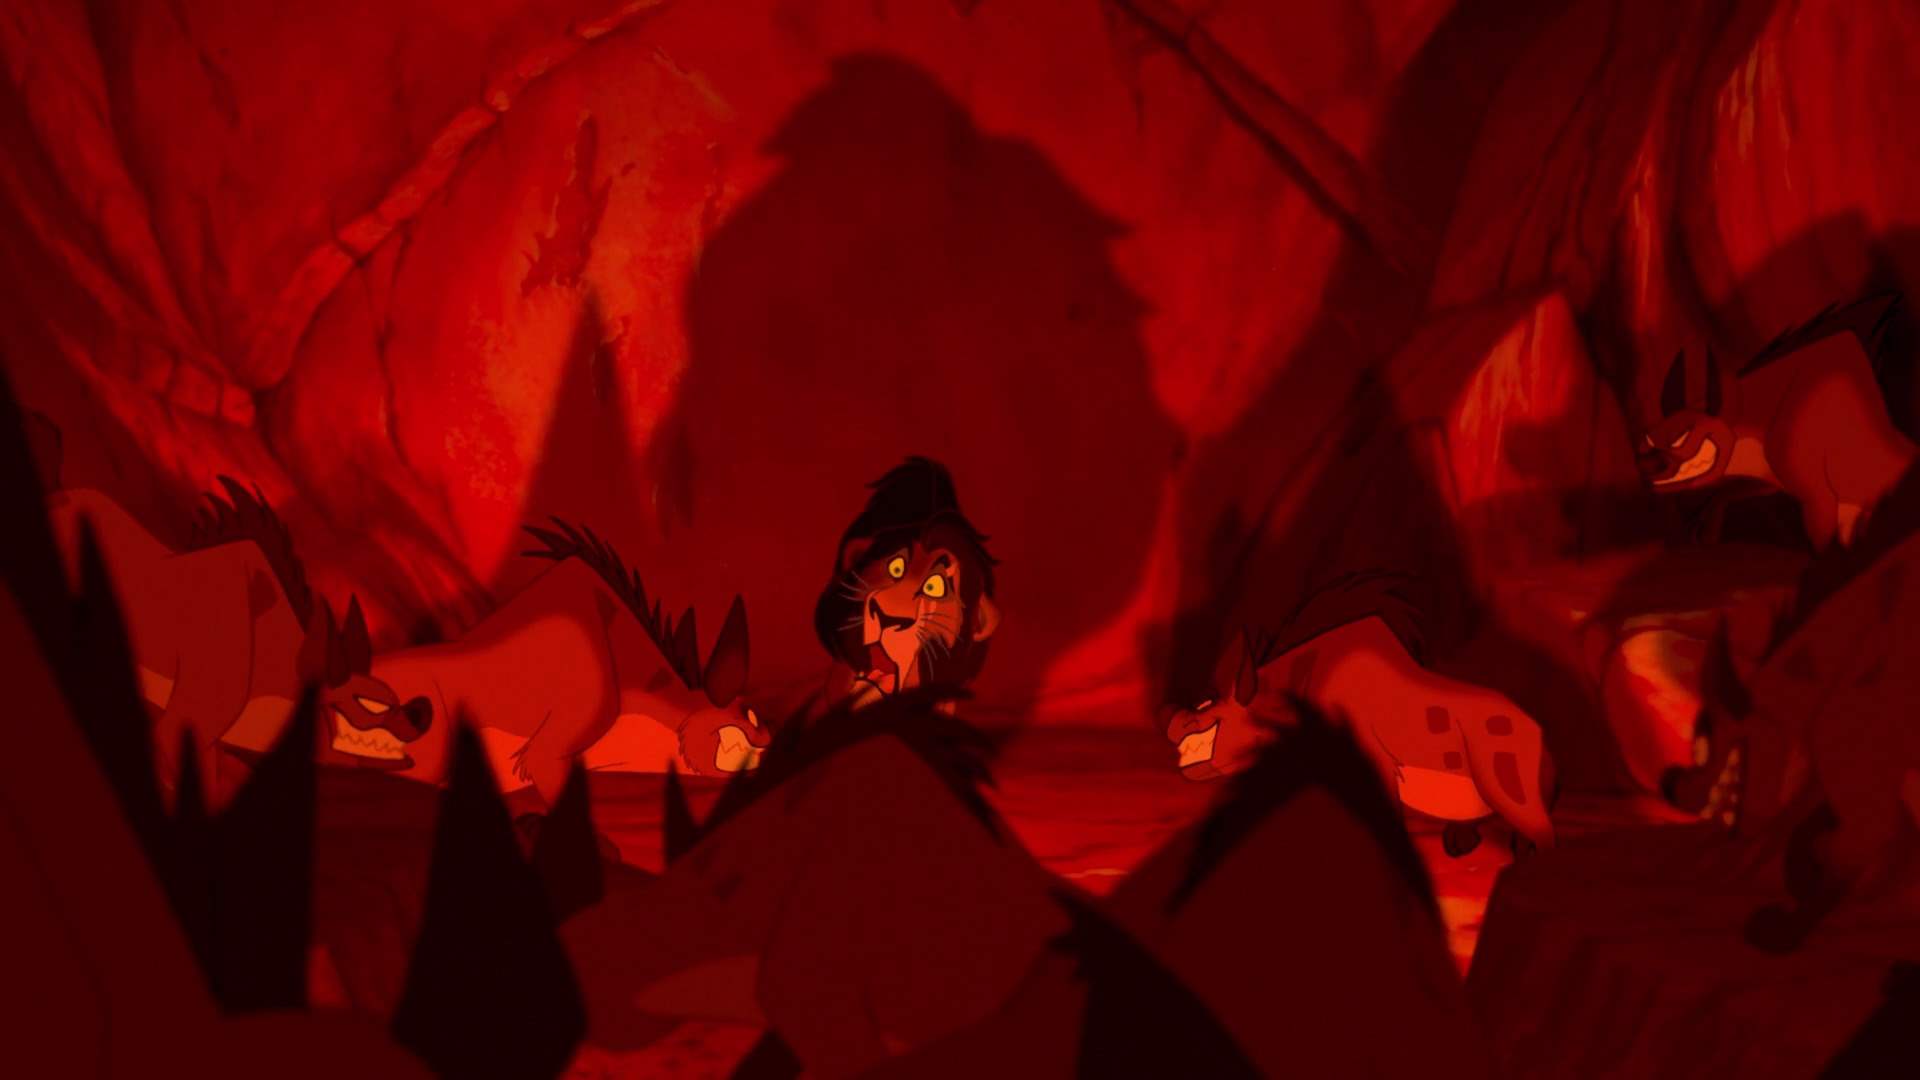 Scar's death in The Lion King